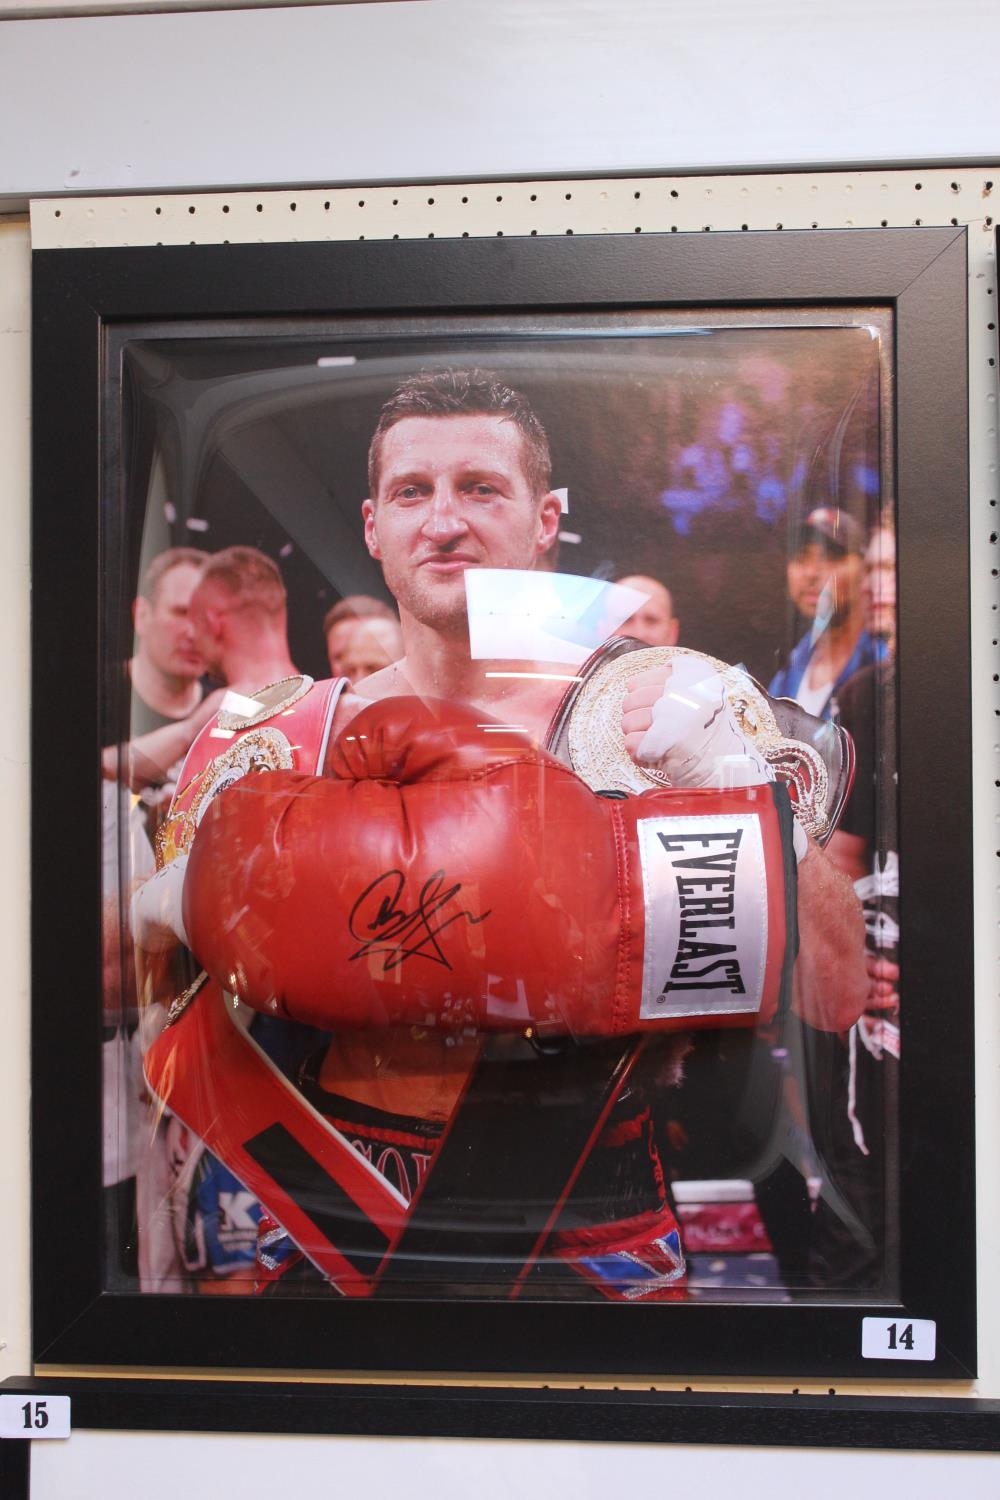 Carl Froch signed Everlast glove in bubble presentation case. 51 x 61cm total size